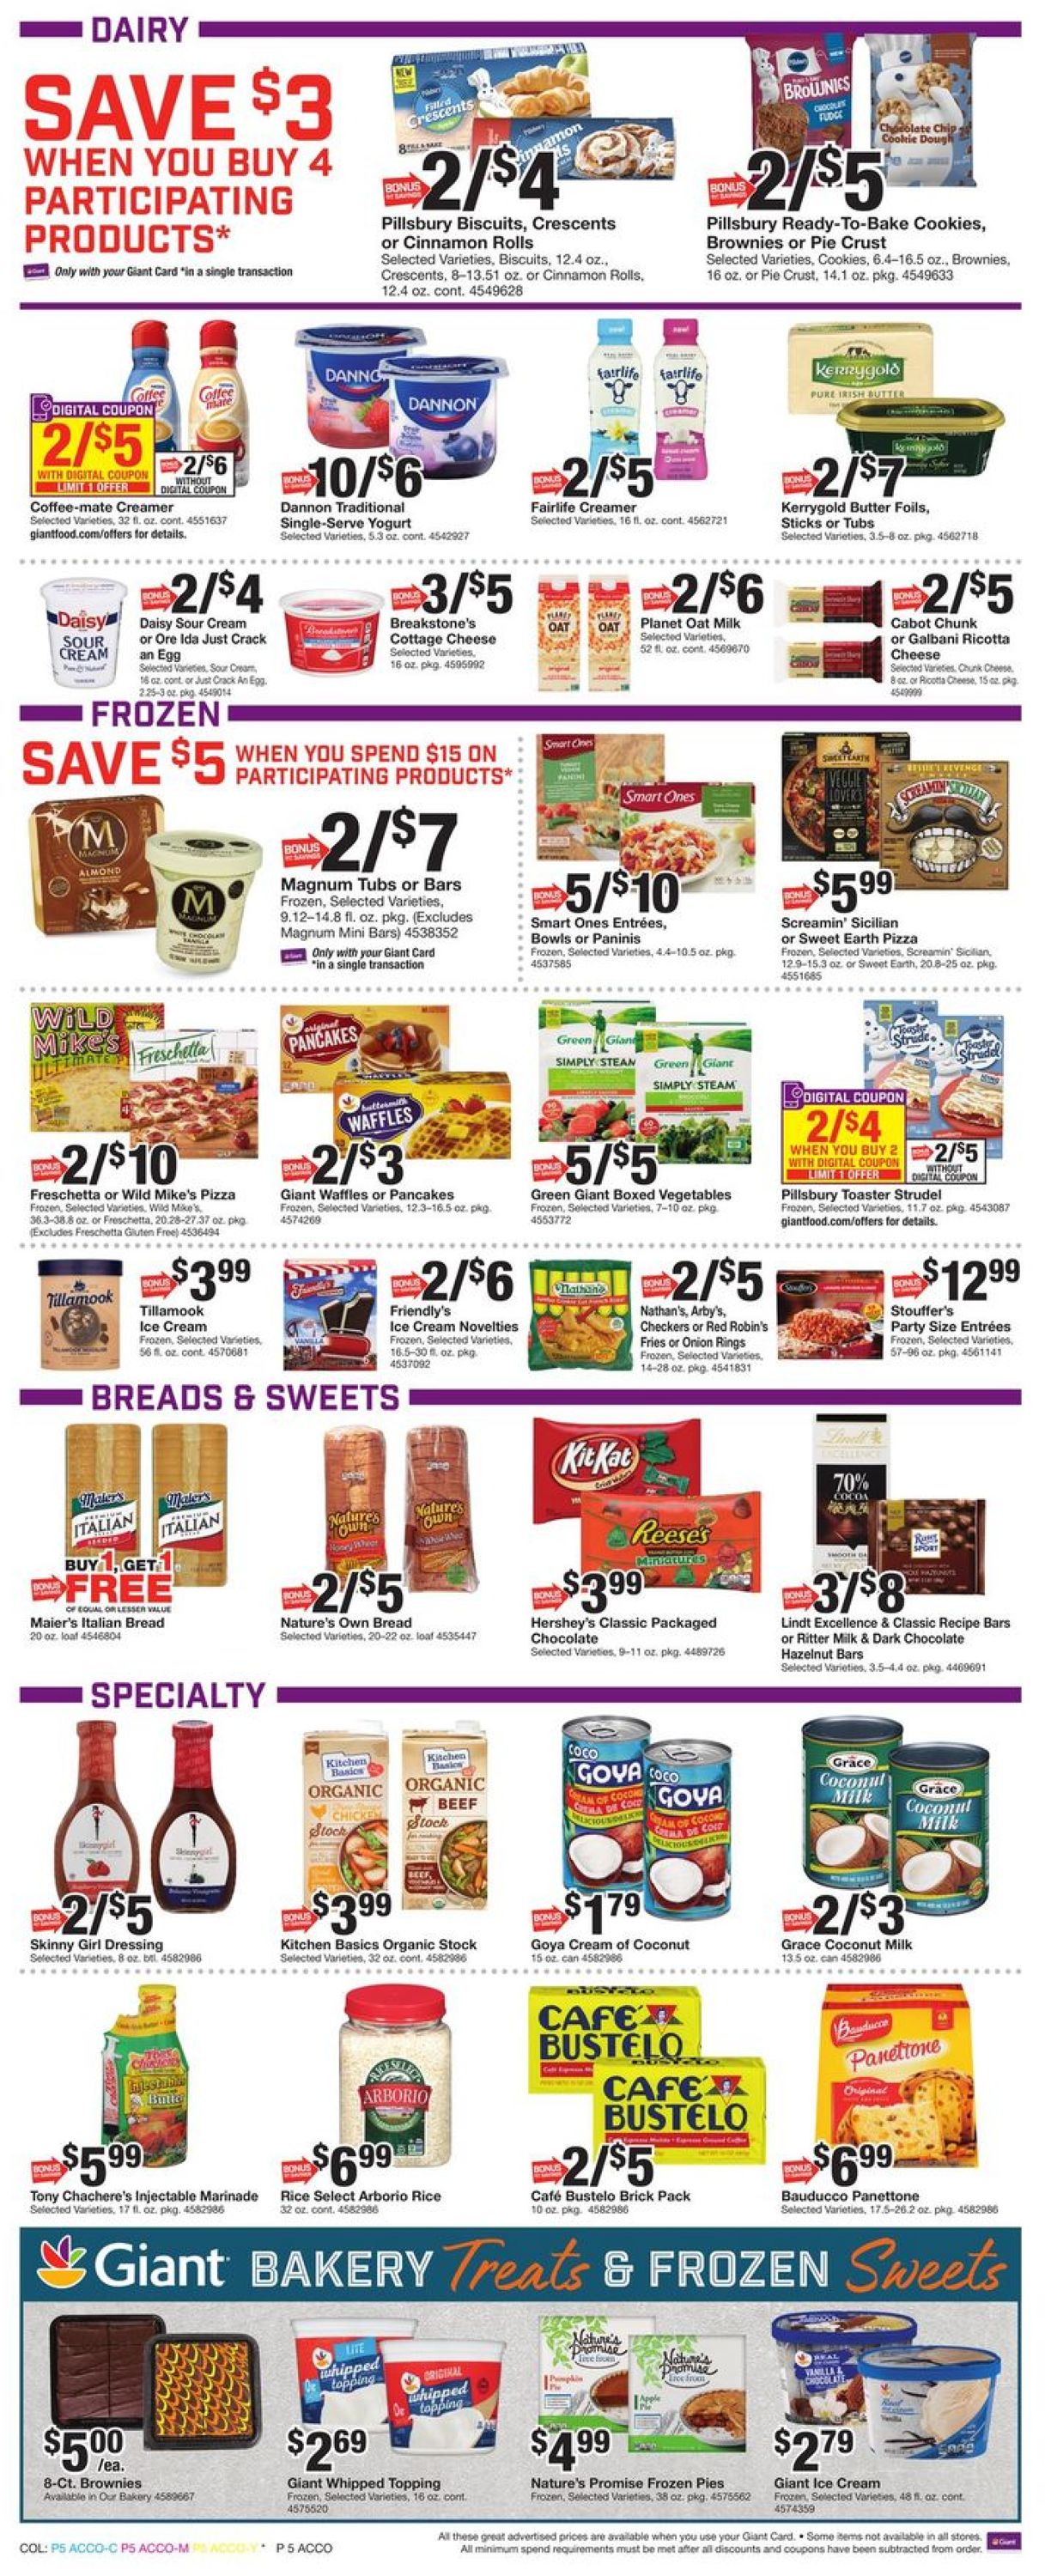 Giant Food Thanksgiving 2020 Weekly Ad Circular - valid 11/20-11/26/2020 (Page 9)